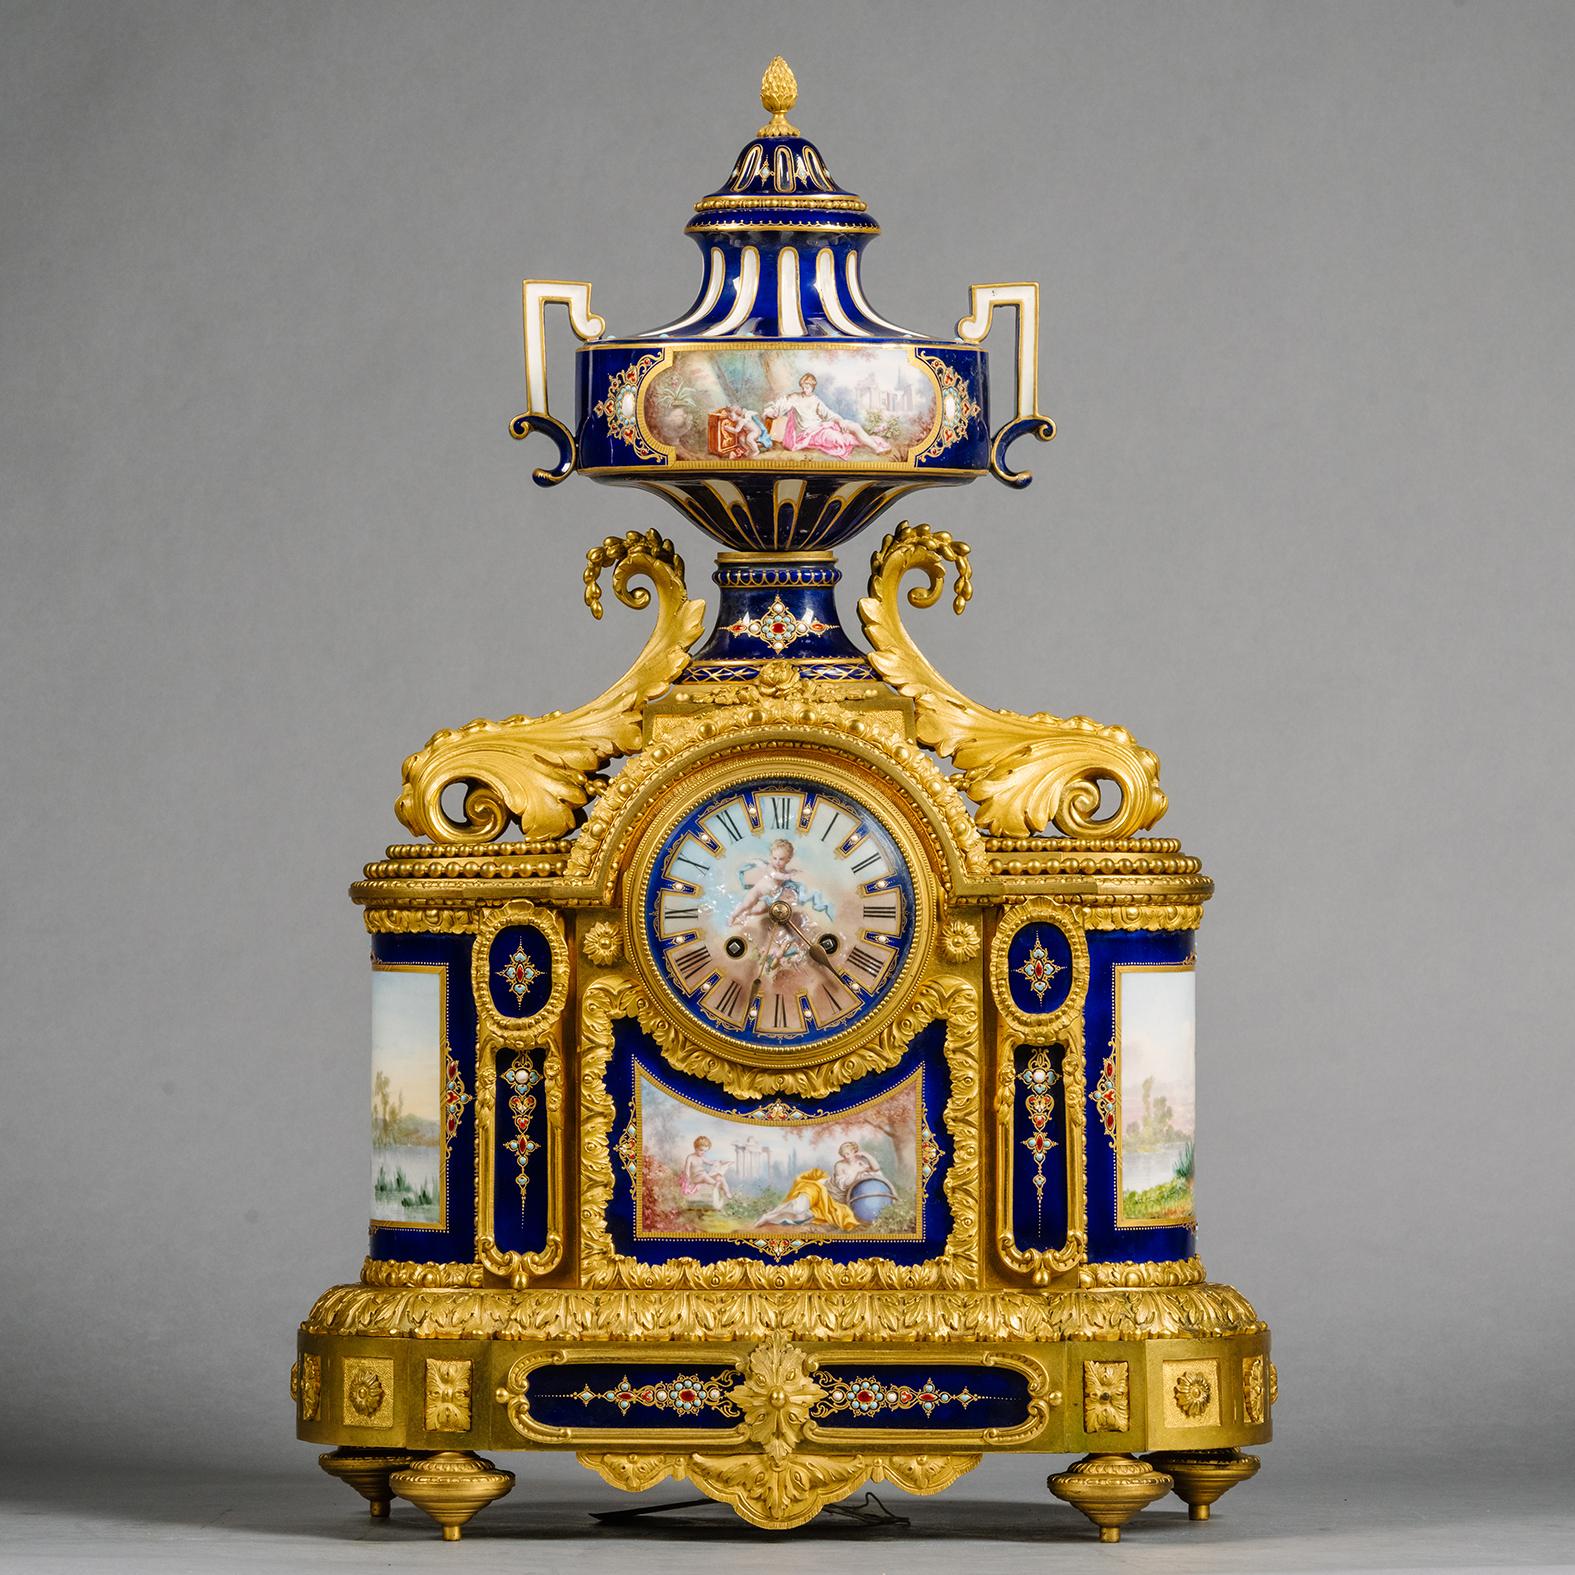 A Large Gilt-Bronze and Sèvres Style Cobalt Blue Ground Porcelain Three-Piece Clock Garniture. 

Comprising a mantle clock and a pair of vases and covers. The mantel clock modelled with a two-handle neoclassical vase above a rectangular base fronted